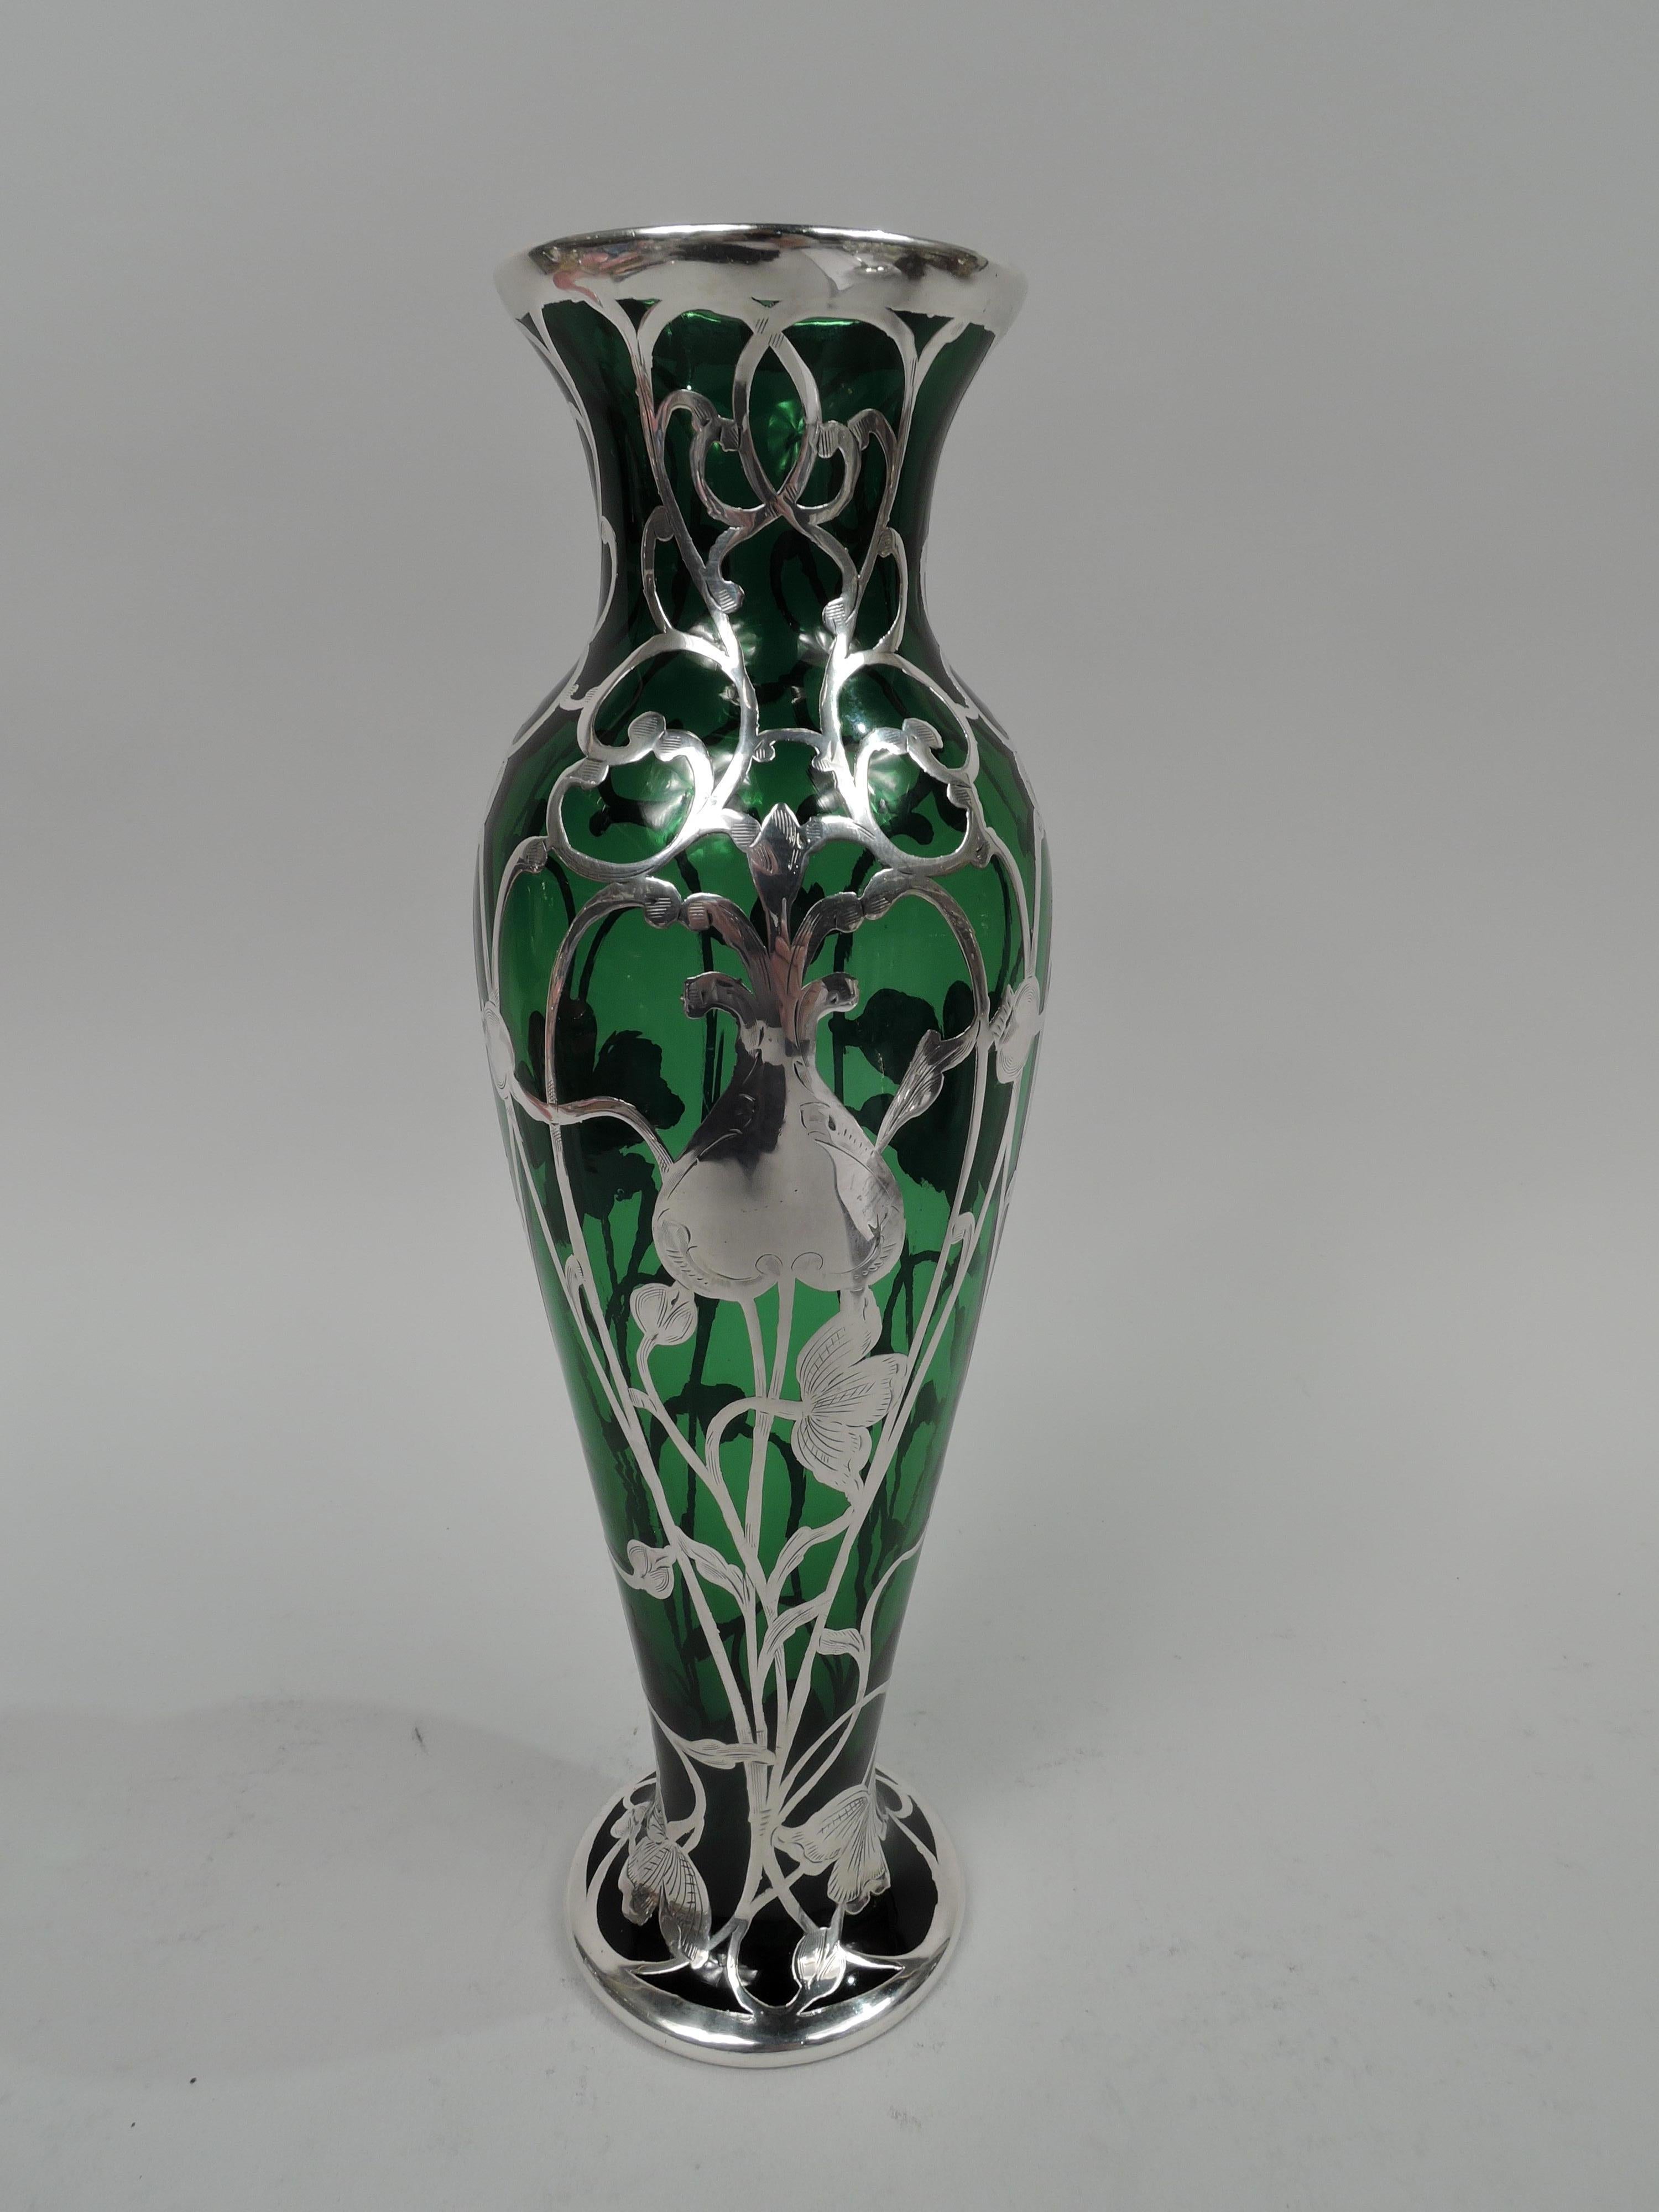 Turn-of-the-century American Art Nouveau glass vase with engraved silver overlay. Ovoid with short inset neck, flared mouth, and spread foot. Loose and open overlay comprising entwined tendrils and flowers from tight buds to splayed flower heads.